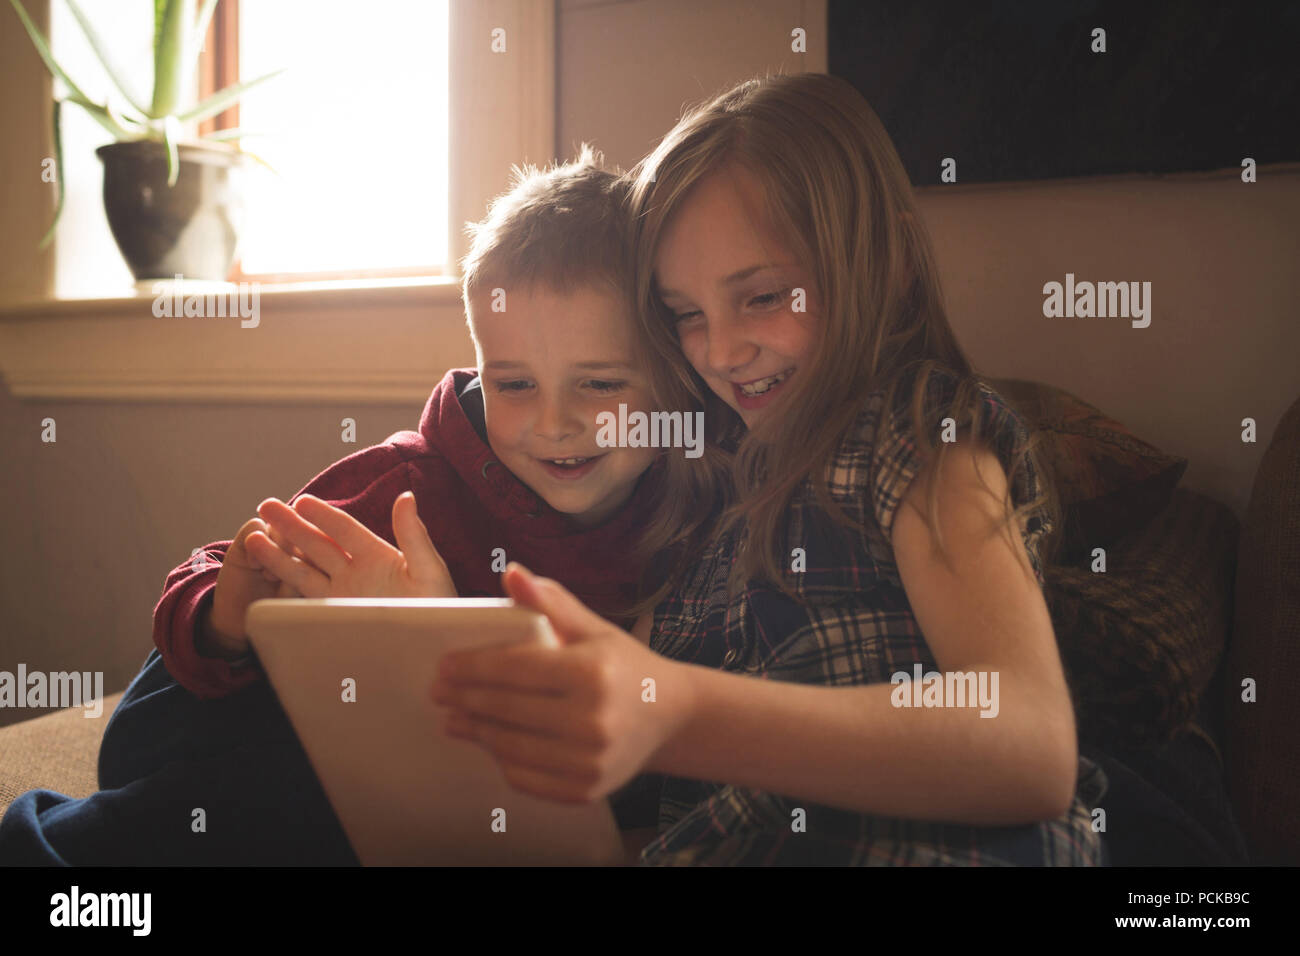 Sibling using tablet on sofa at home Stock Photo